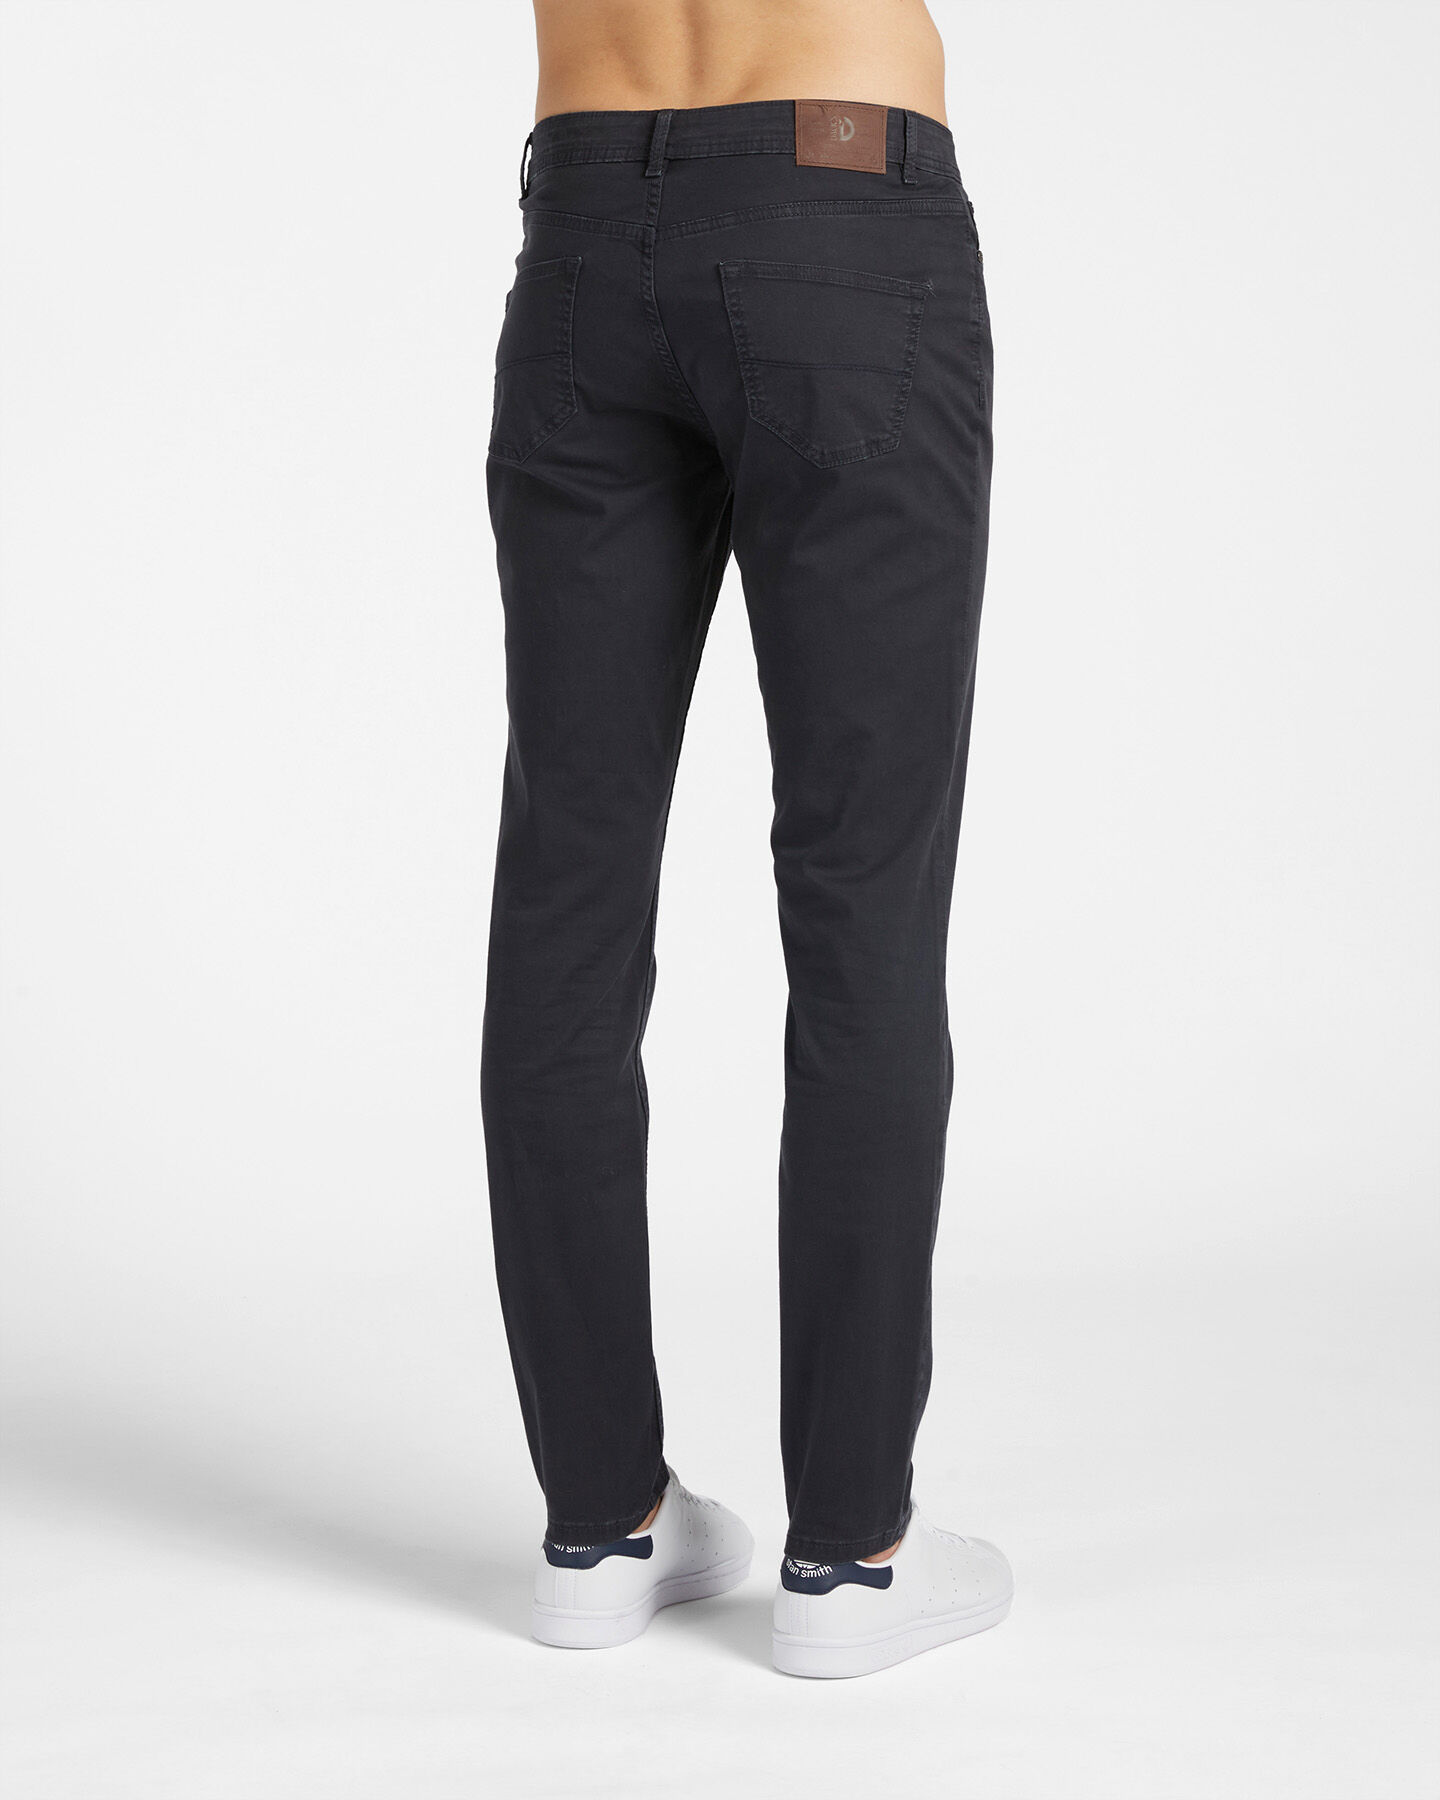  Pantalone DACK'S BASIC COLLECTION M S4118683|1125|44 scatto 1